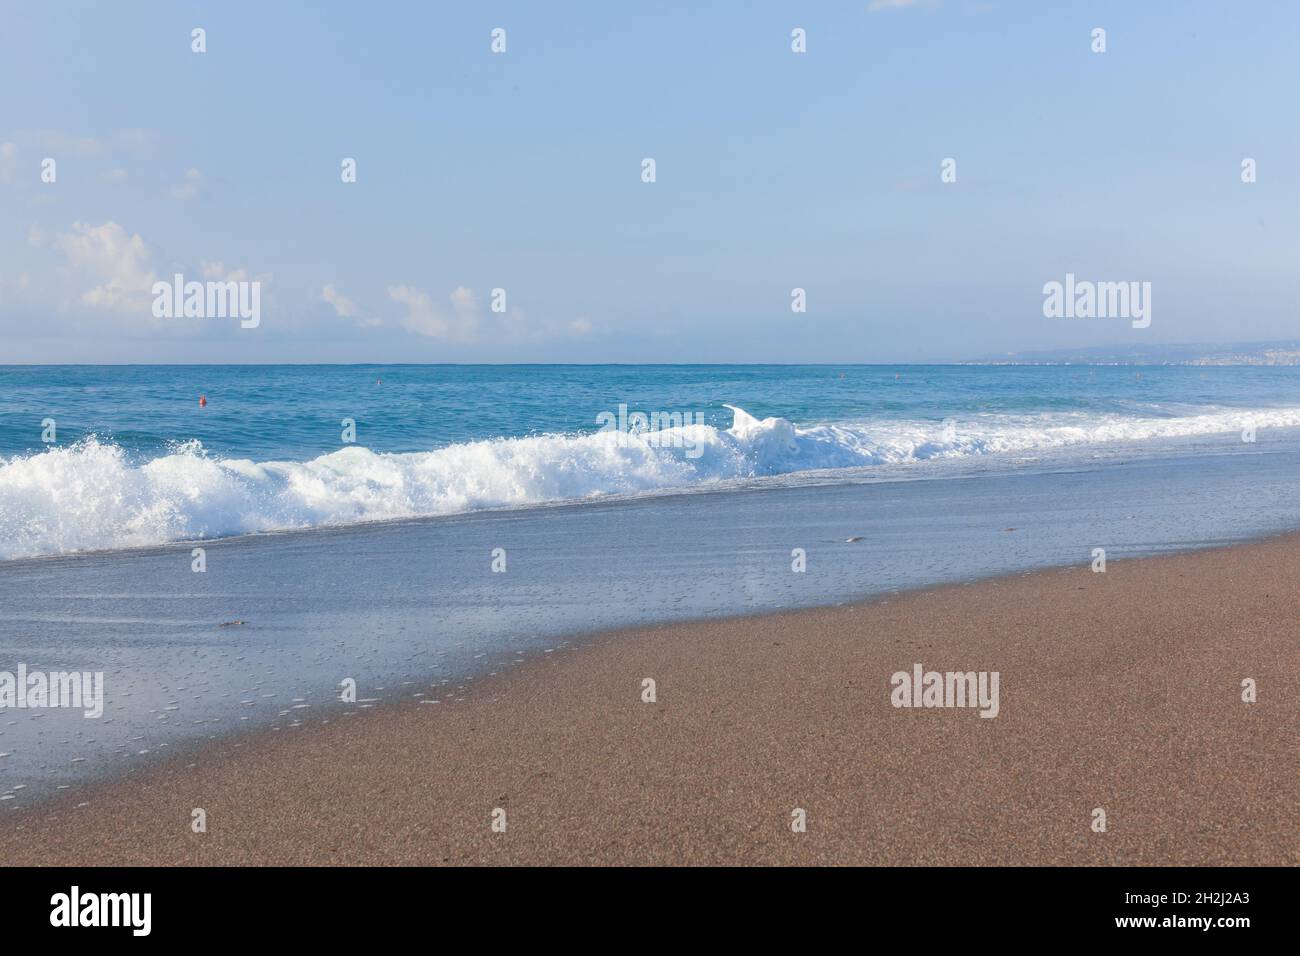 Waves on the beach. Sand and blue water. Sicily, Italy. Stock Photo